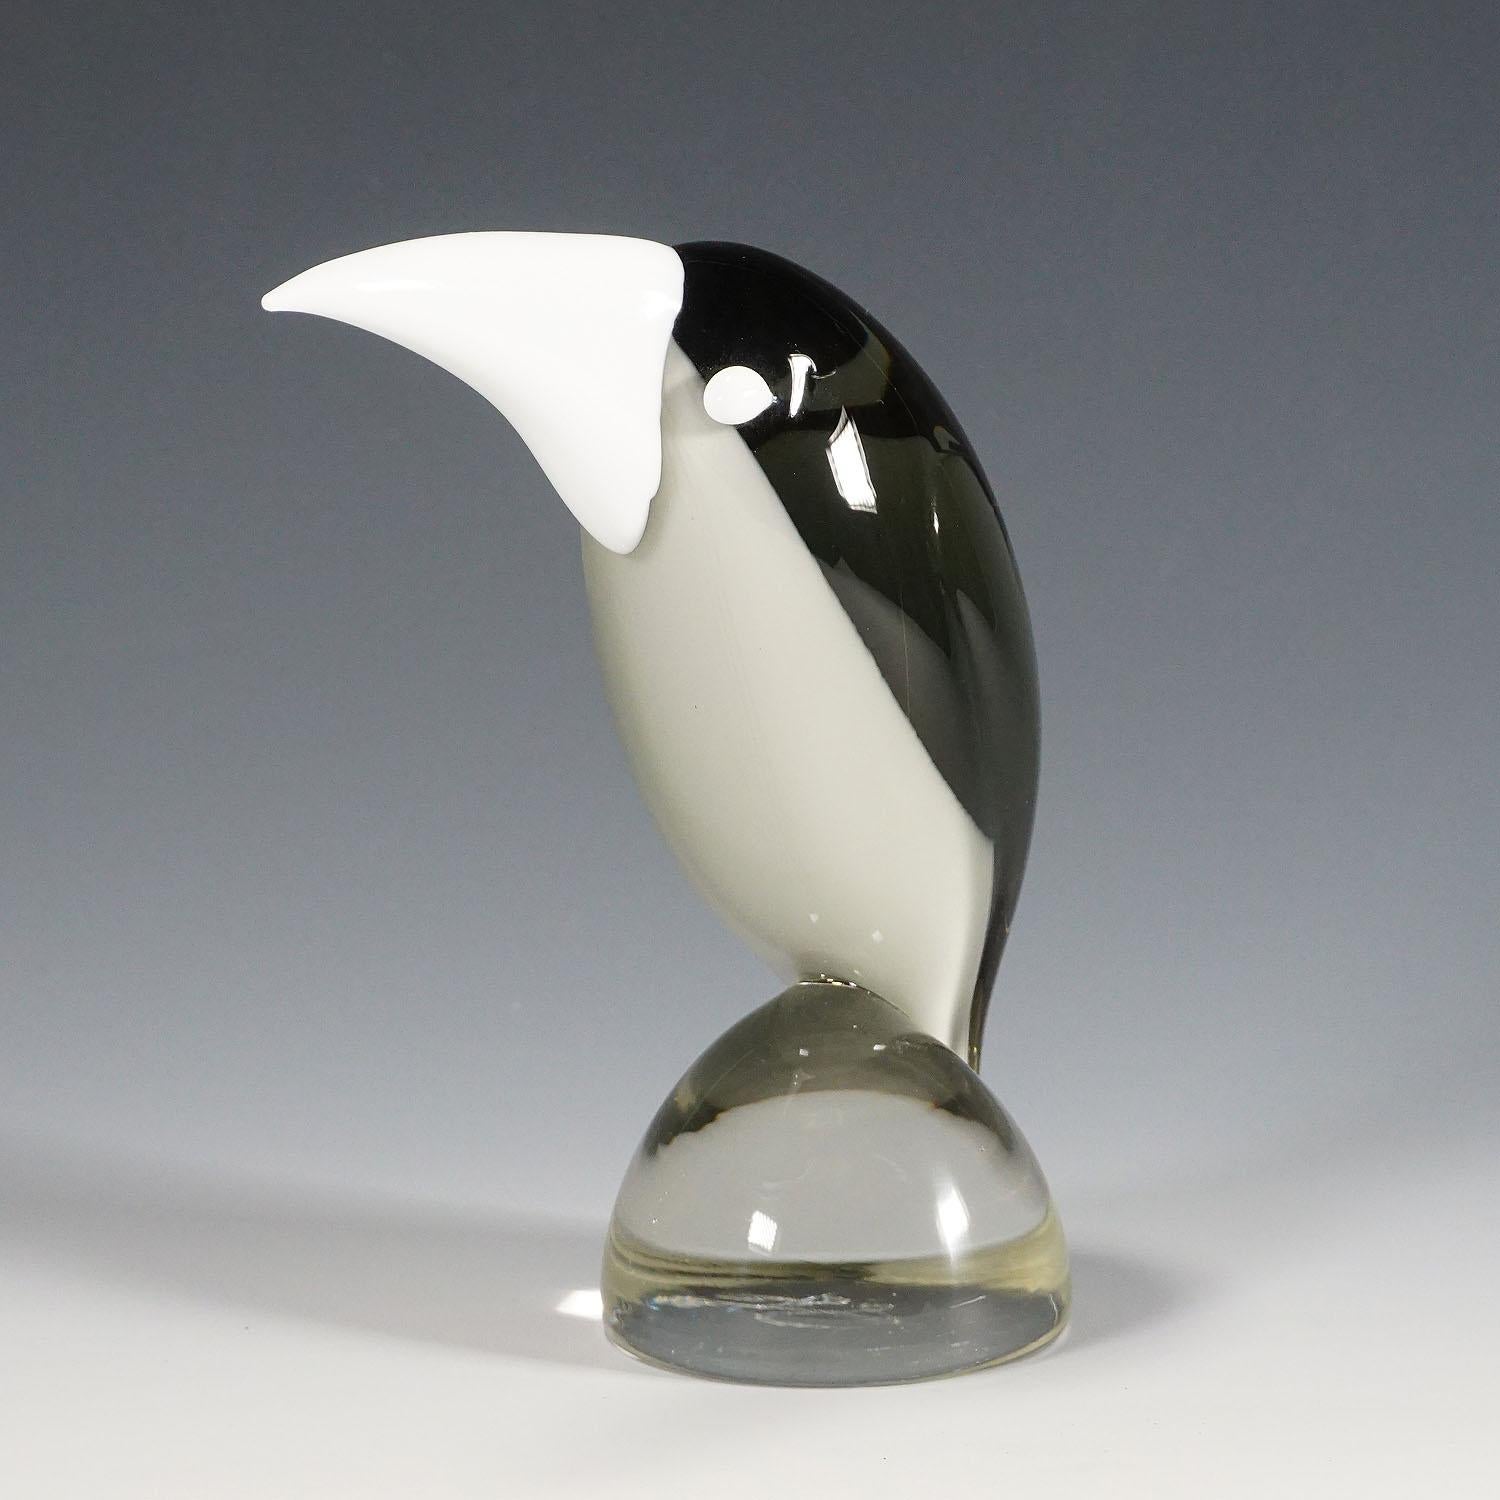 A sculpture of a stylized grosbeak in smoke grey and opaque glass. It is hand made in the Gral glass manufactory, Germany. Designed by Livio Seguso, ca. 1970. Incised signature of the artist (LS) on the base.

Livio Seguso (* 1930) comes from a